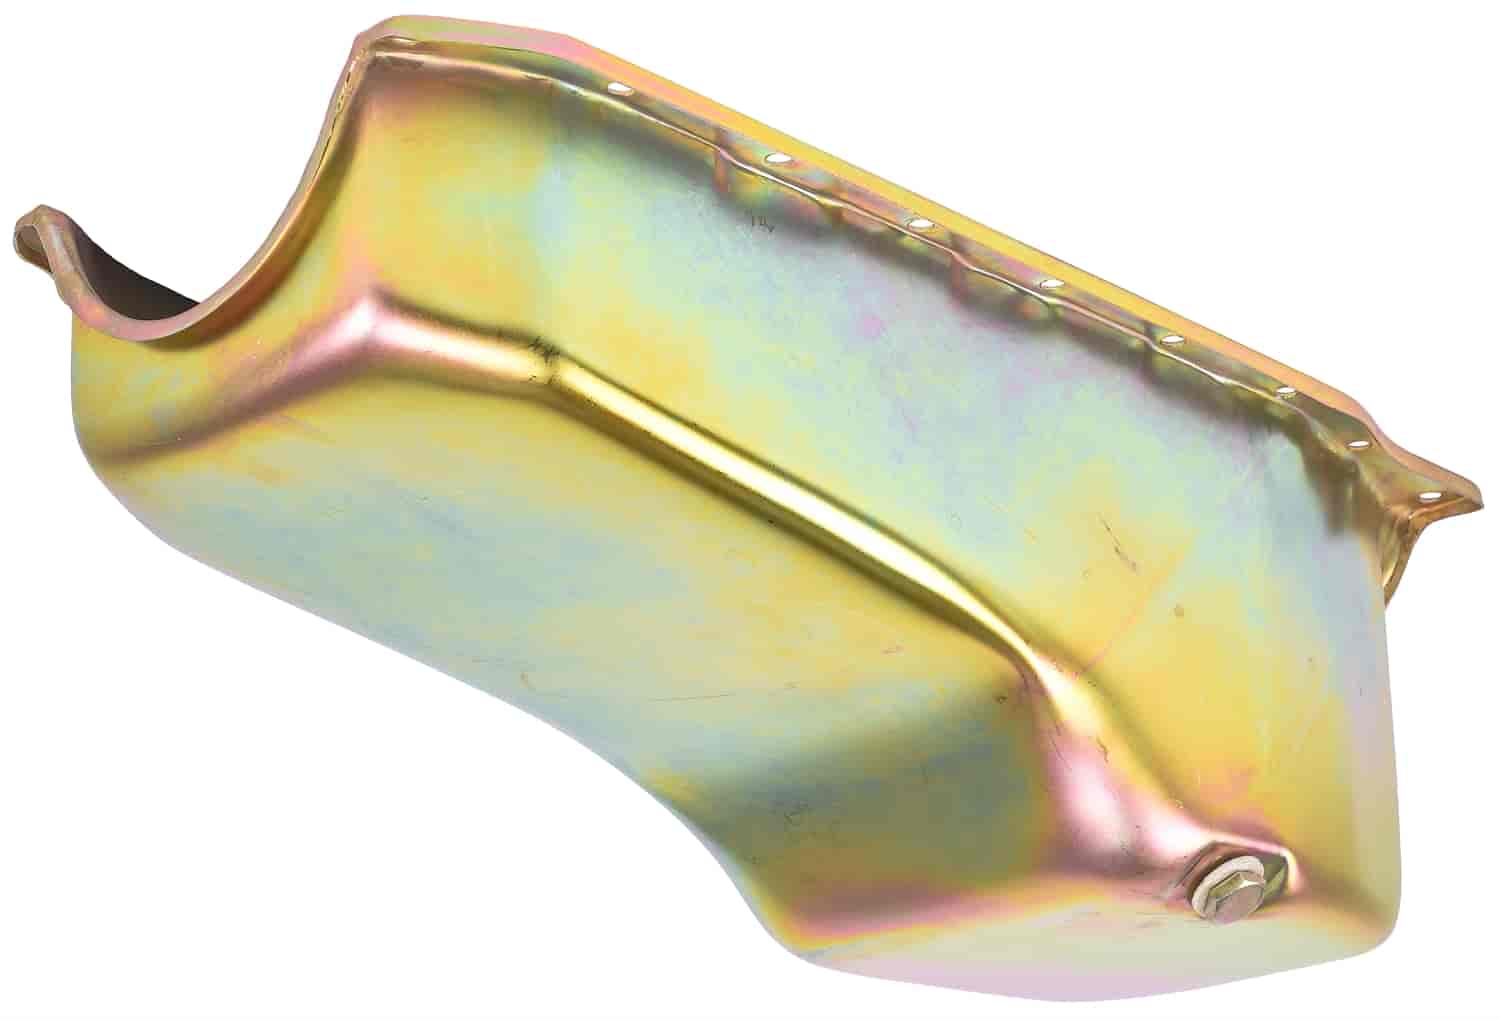 Stock-Style Replacement Oil Pan for 1986-1992 Small Block Chevy w/Right Hand Dip Stick [Gold Zinc]